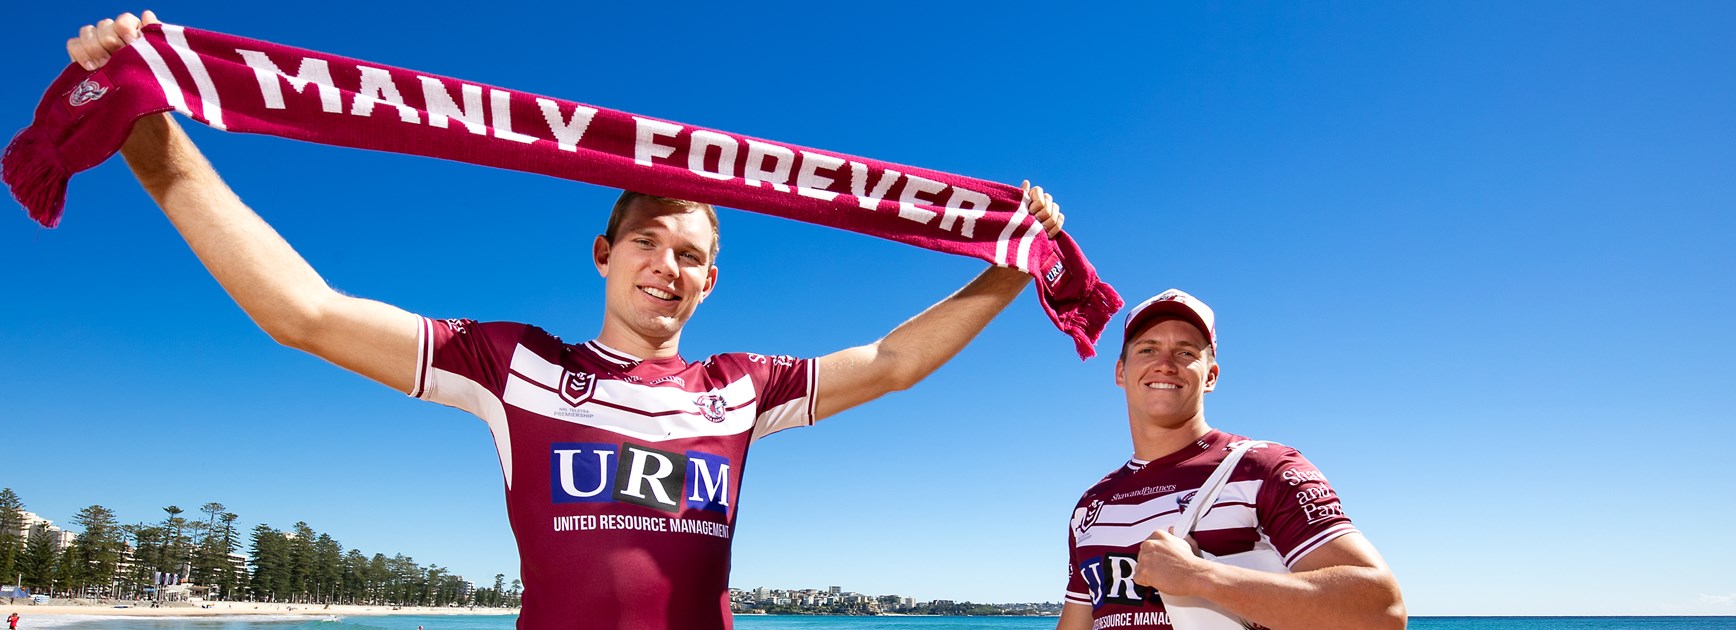 Sea Eagles surpass 10,000 Members in record time